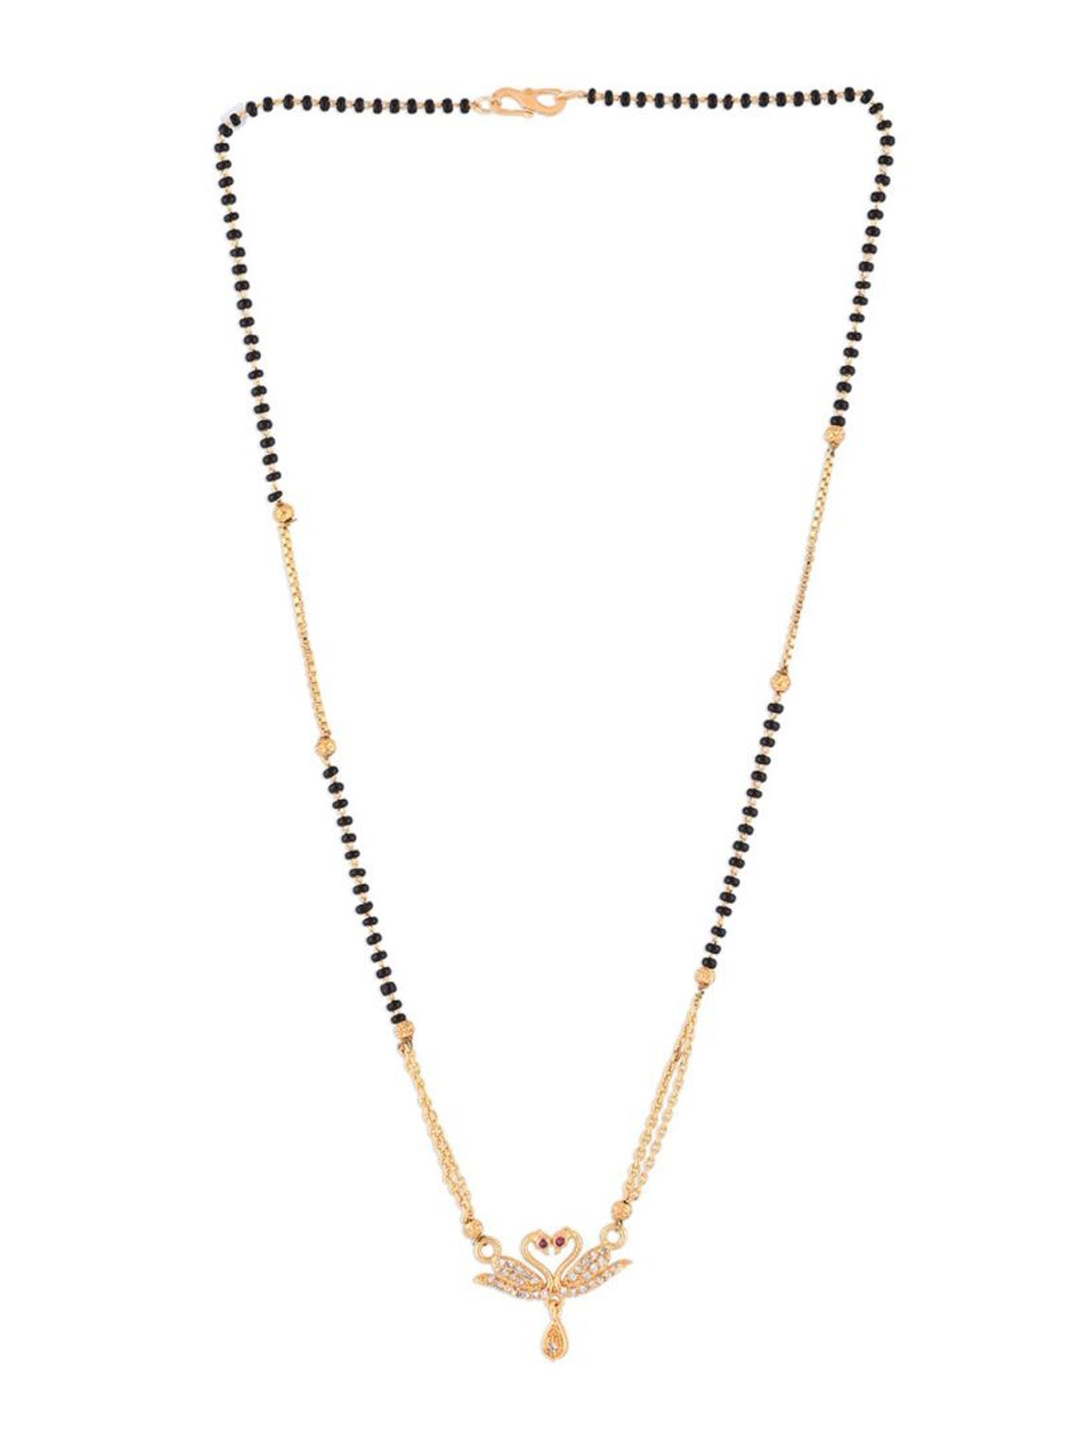 Buy Efulgenz Crystals Beaded Gold Plated Mangalsutra Mangalsutra For